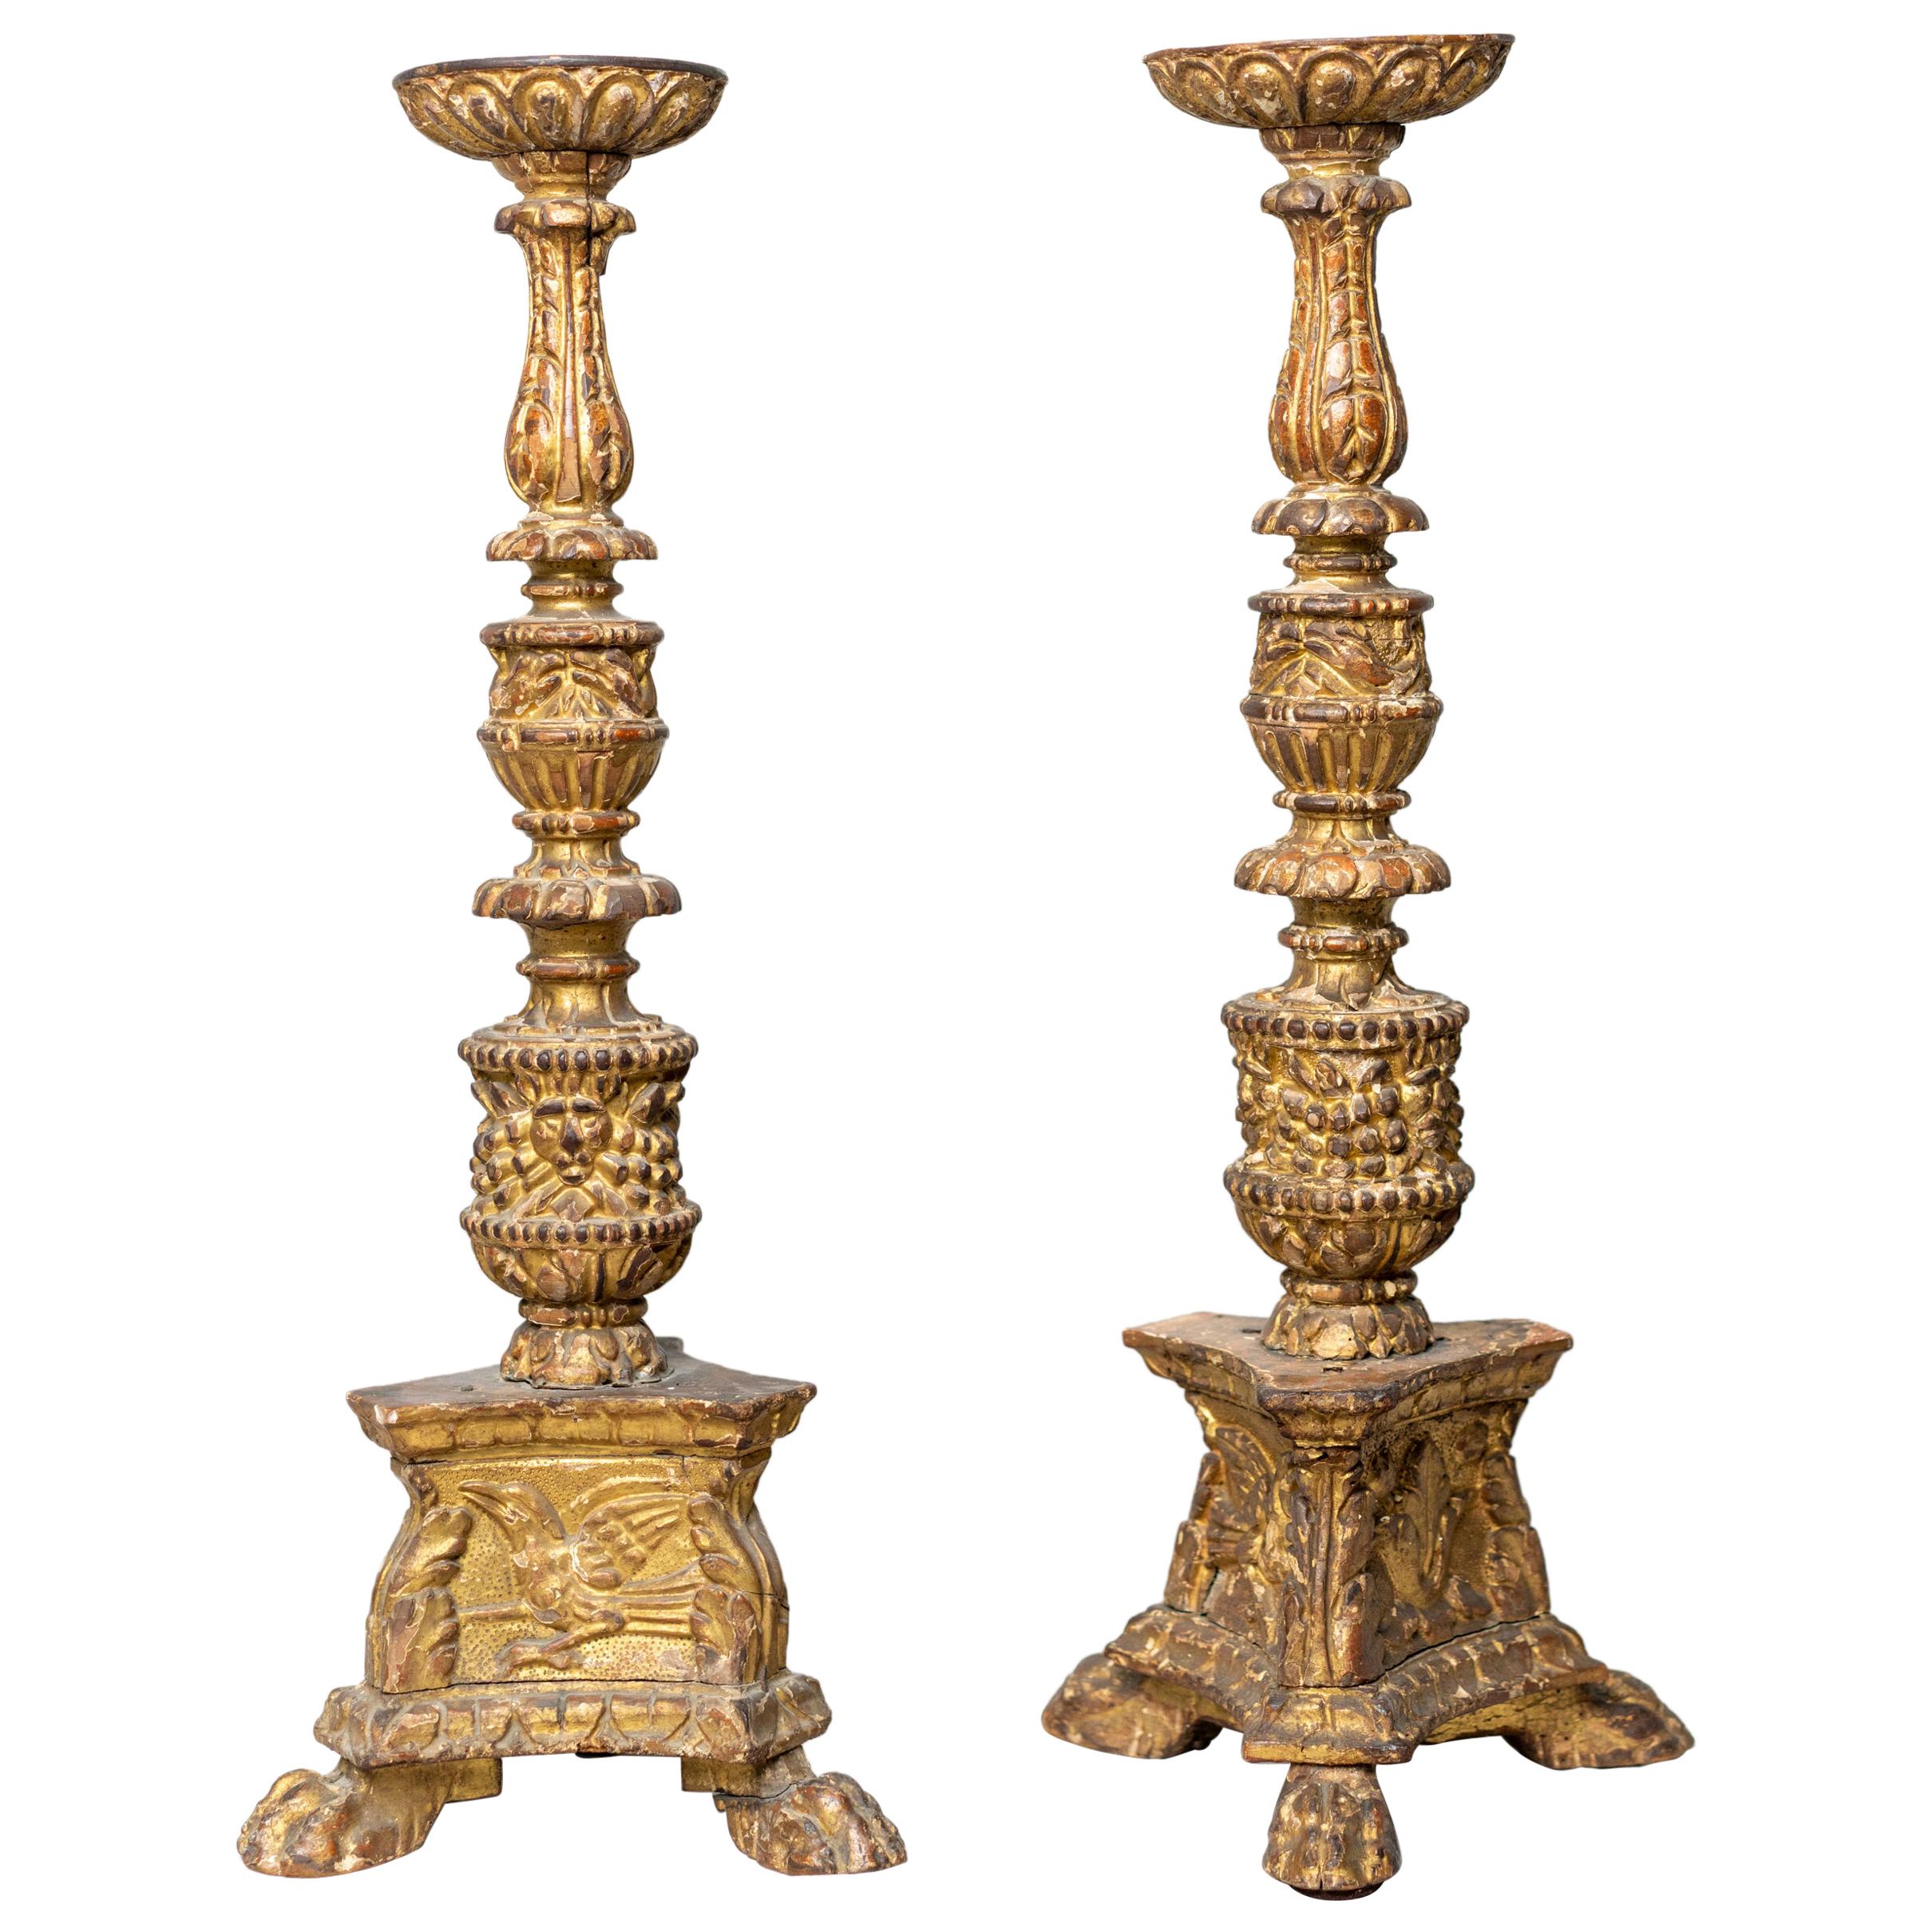 Rare Pair of Louis XIV Period Gilt Wood Carved CandleSticks